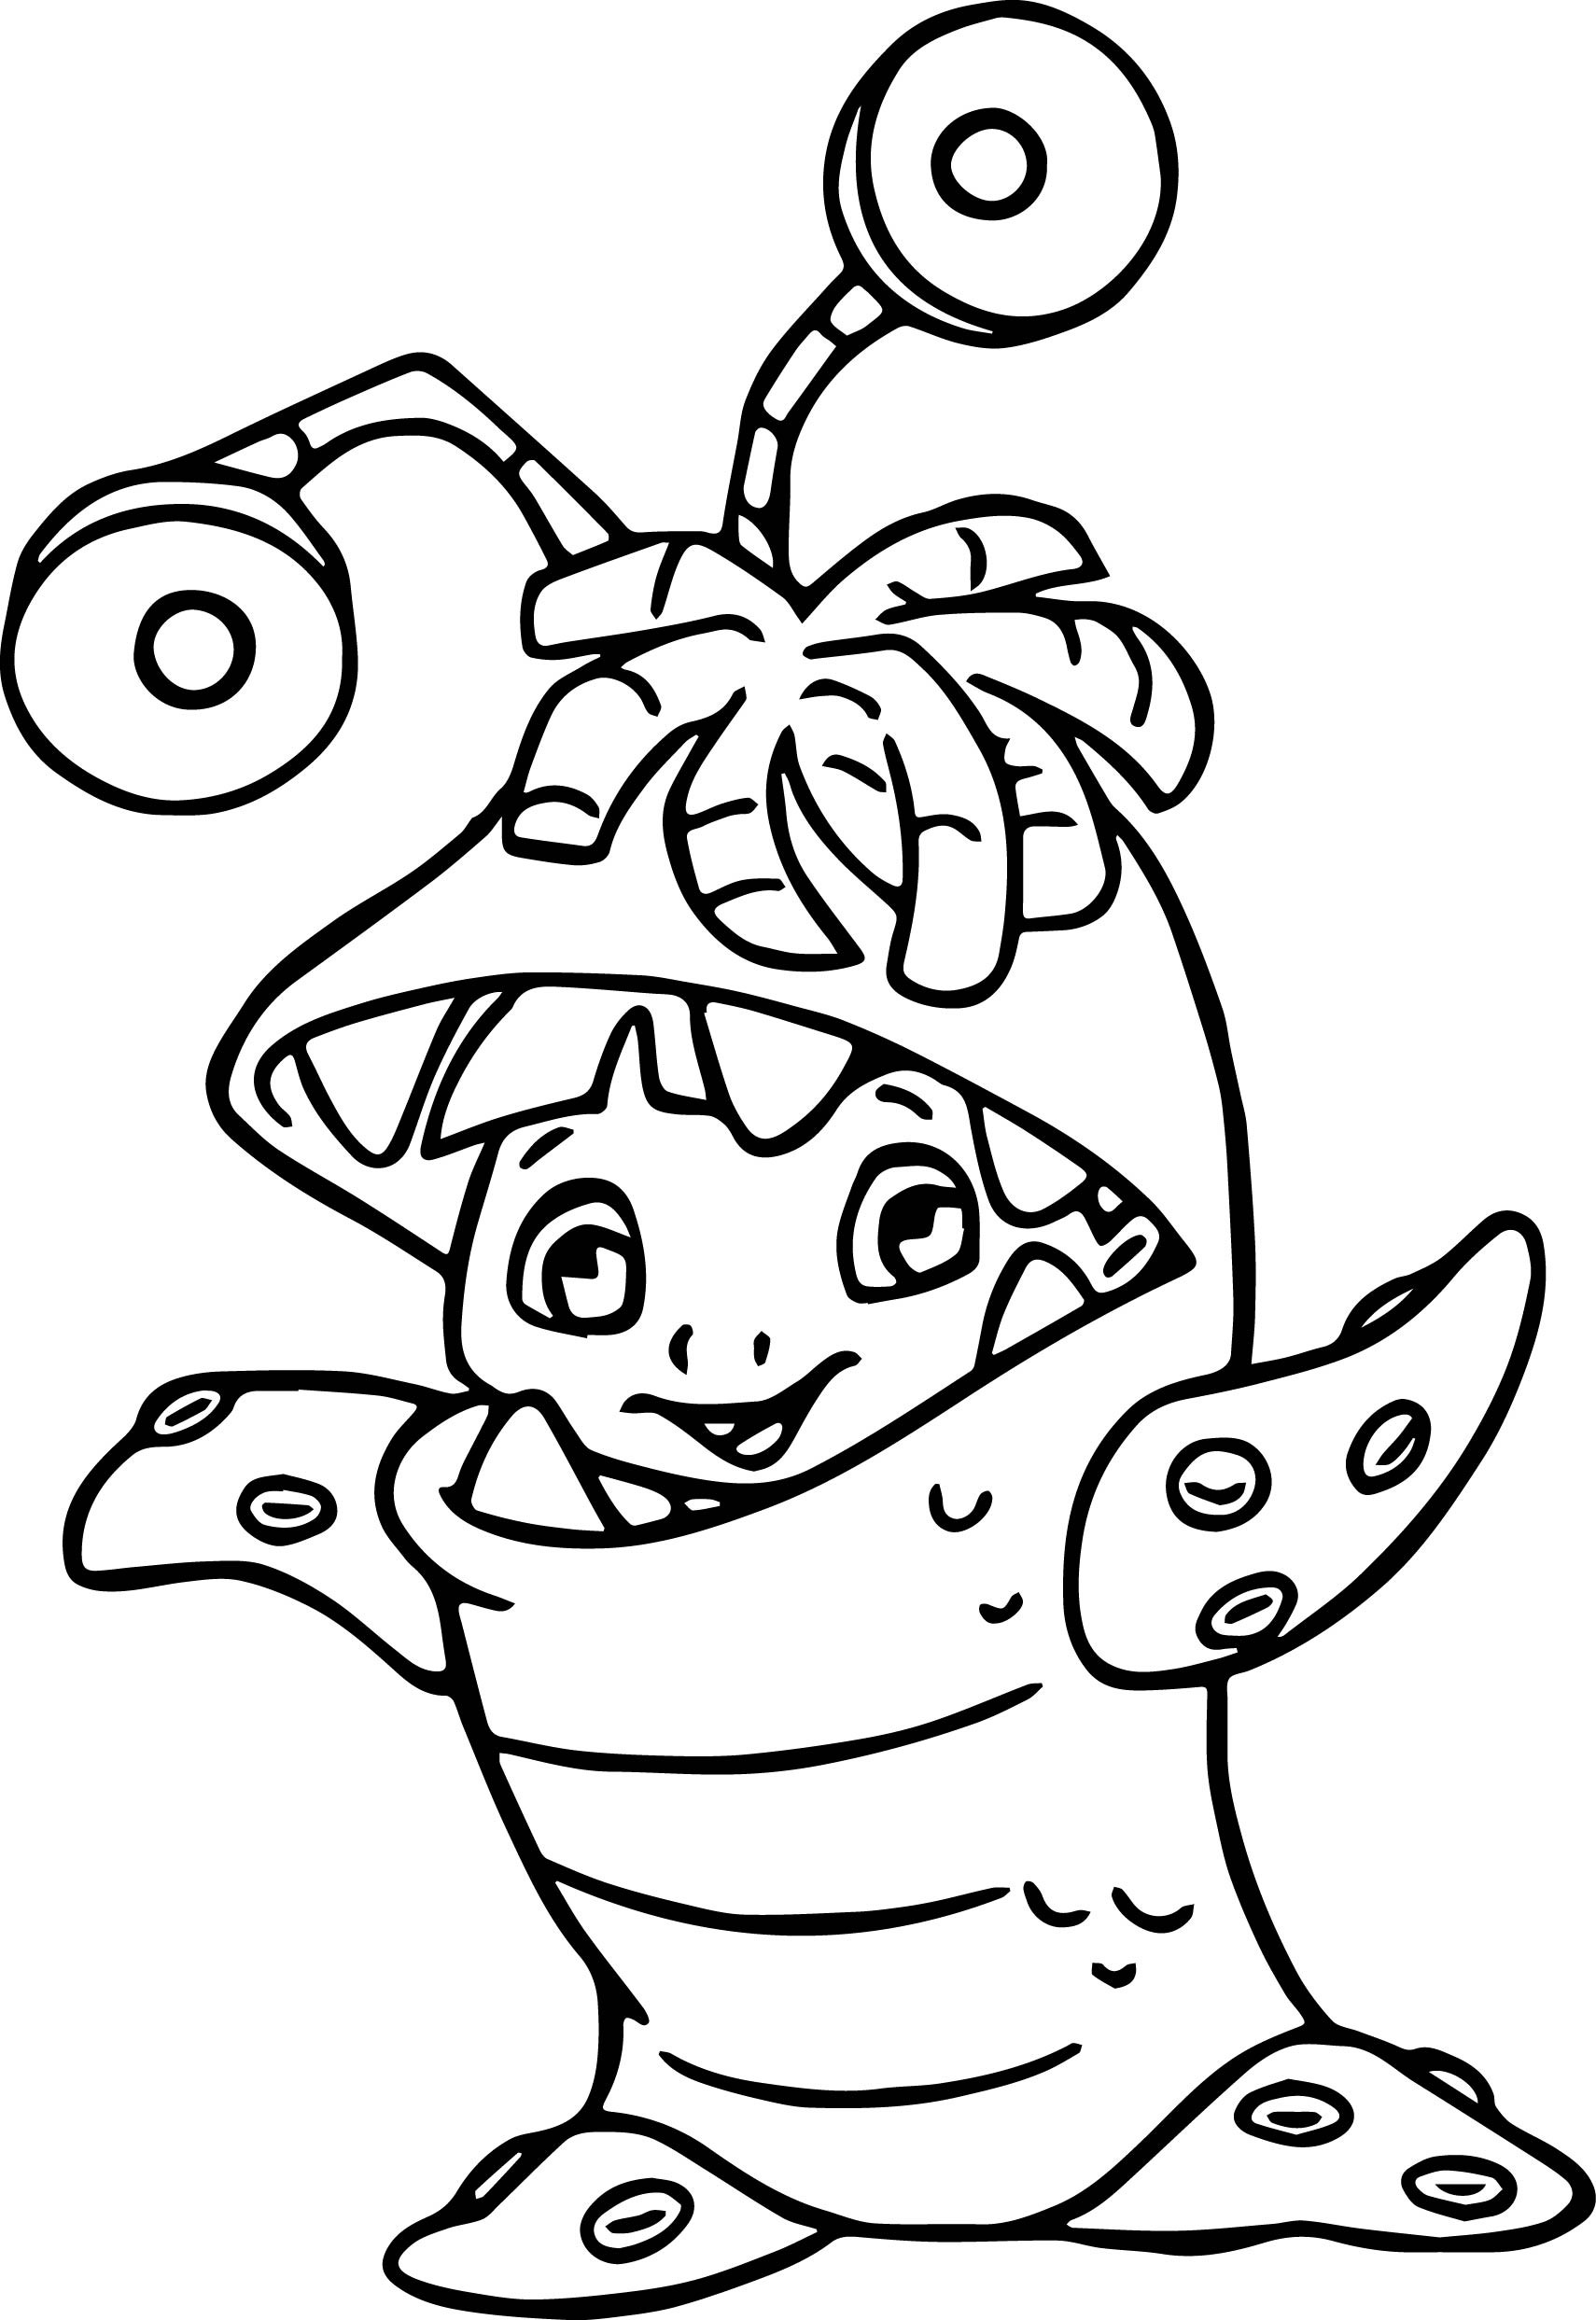 Printable Monsters Inc Coloring Pages - Printable World Holiday